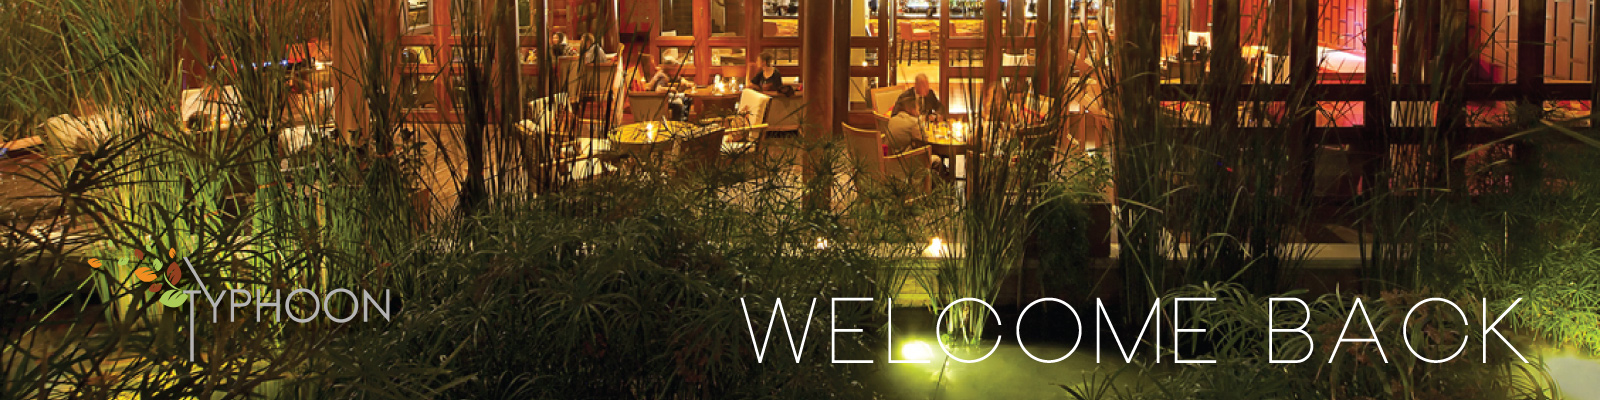 Welcome back! Enjoy a taste of Asia from China Garden and Royal Thai at Typhoon Garden. Best Happy Hour in Town Cocktails & Spirits start at BD 2+++ / 5pm - 7pm